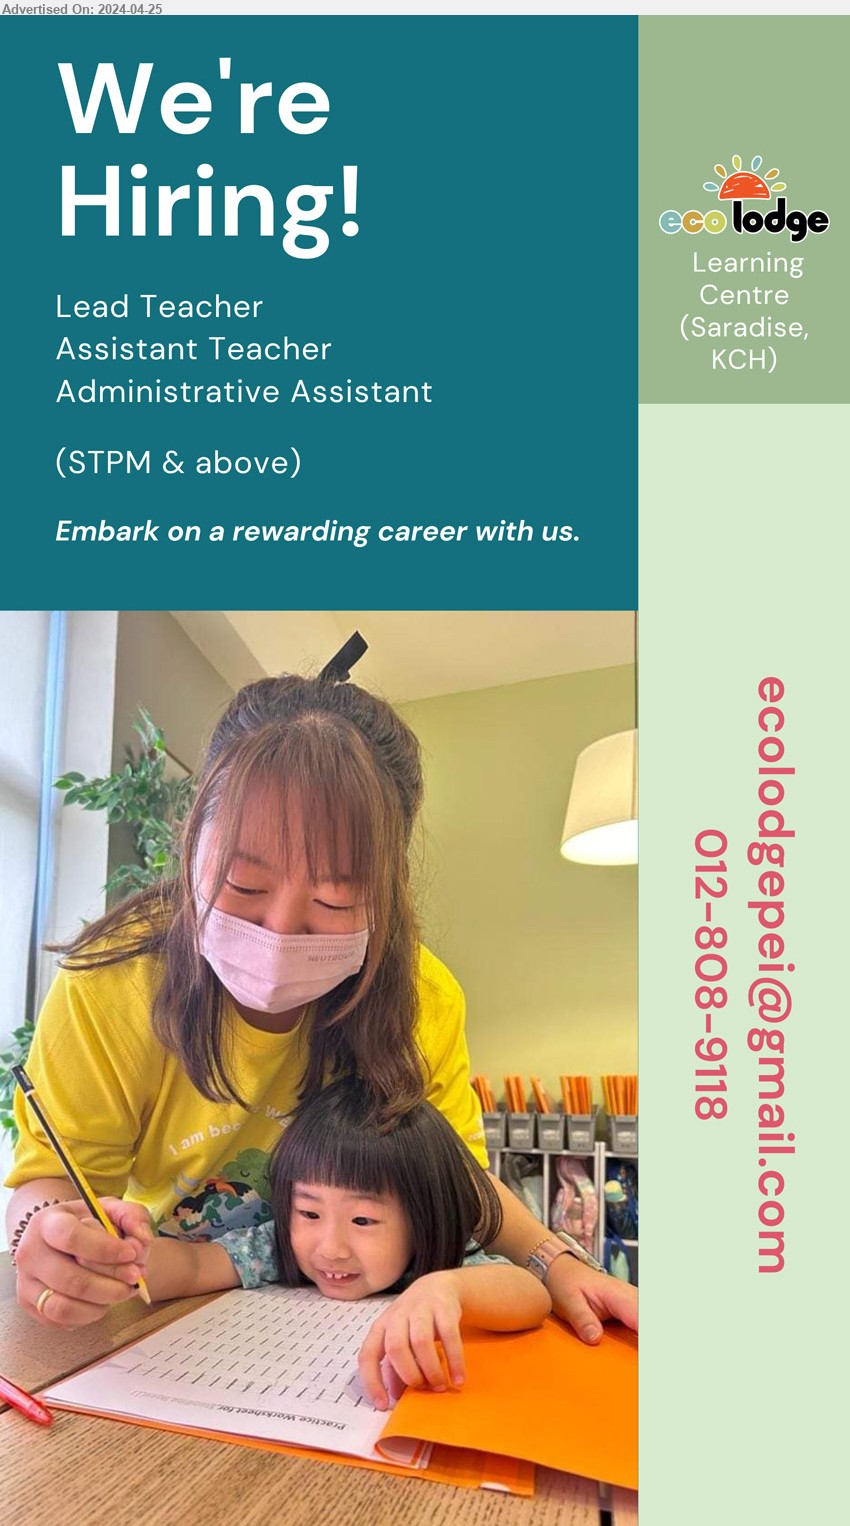 ECO LODGE LEARNING CENTRE - 1. LEAD TEACHER (Kuching).
2. ASSISTANT TEACHER (Kuching).
3. ADMINISTRATIVE ASSISTANT (Kuching).
*** STPM & above
Contact: 012-8089118 / Email resume to ...
